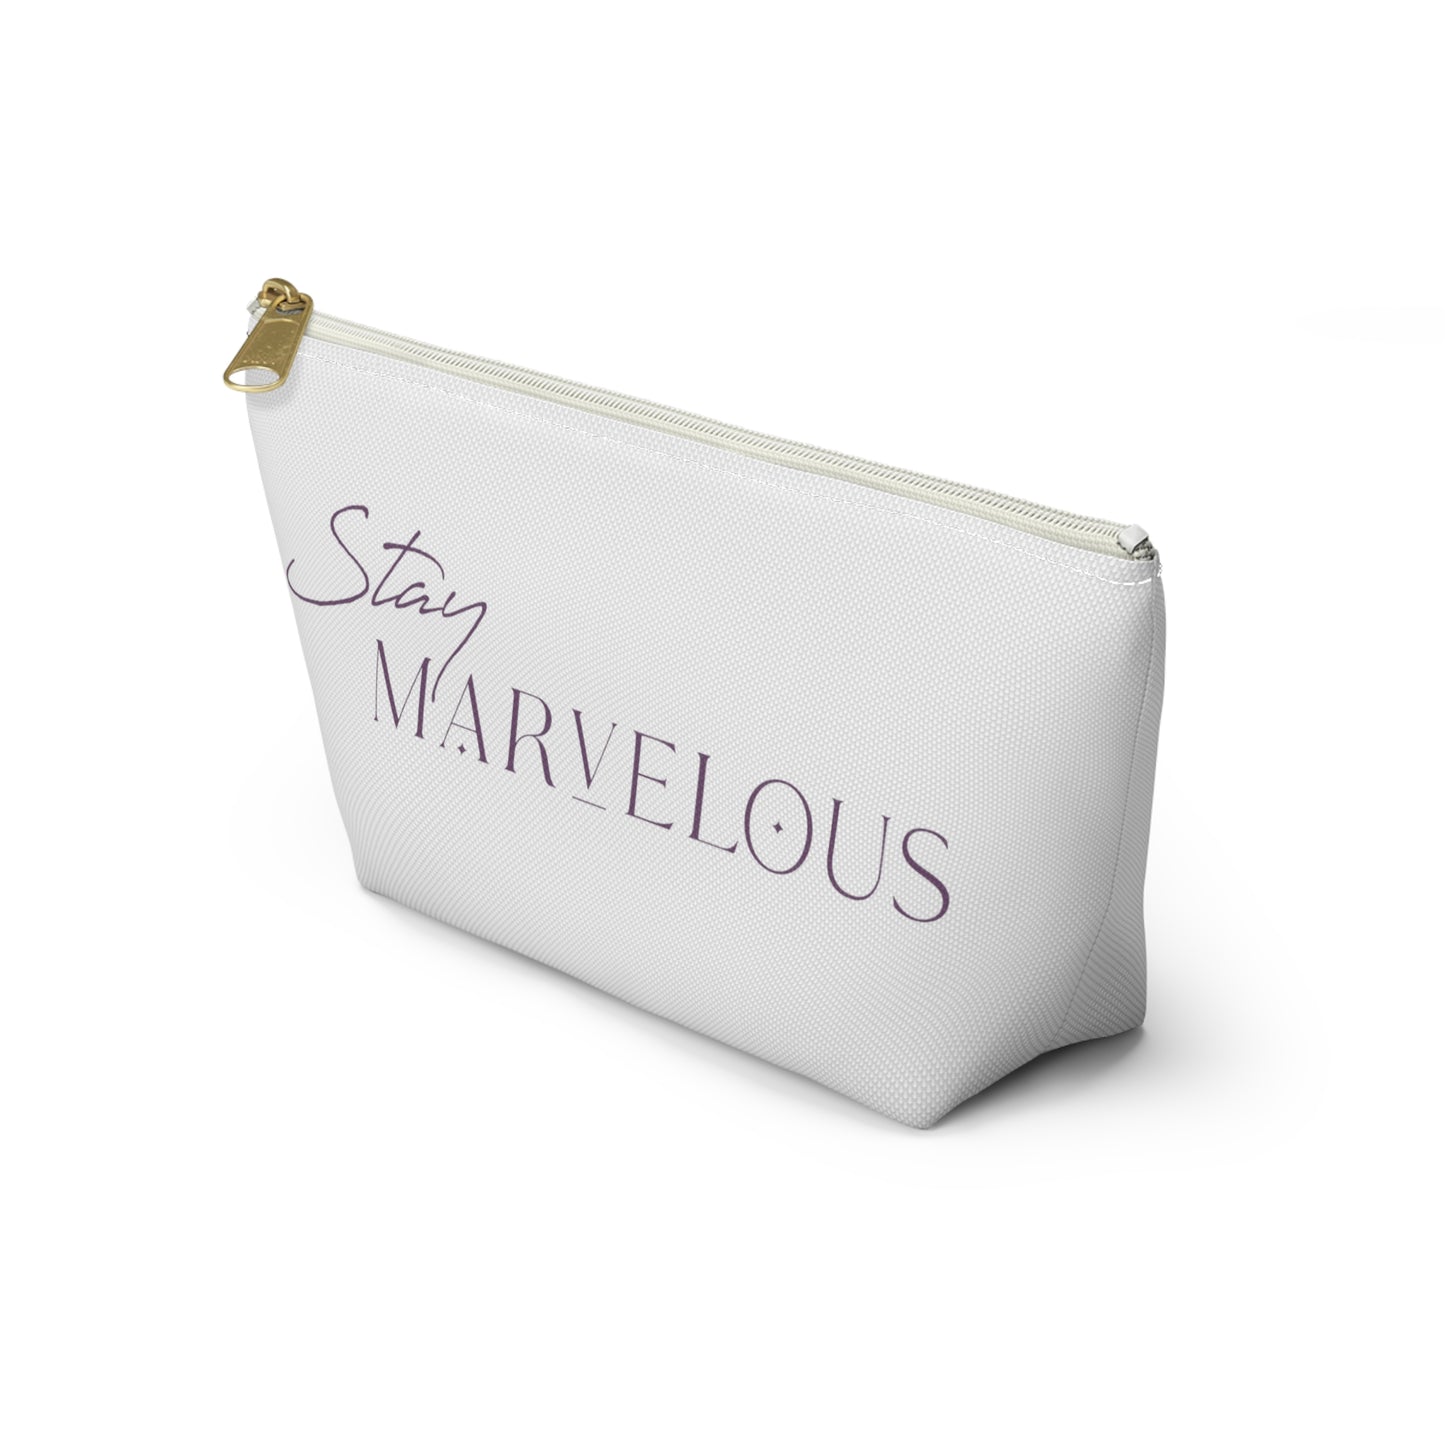 Stay Marvelous Accessory Pouch